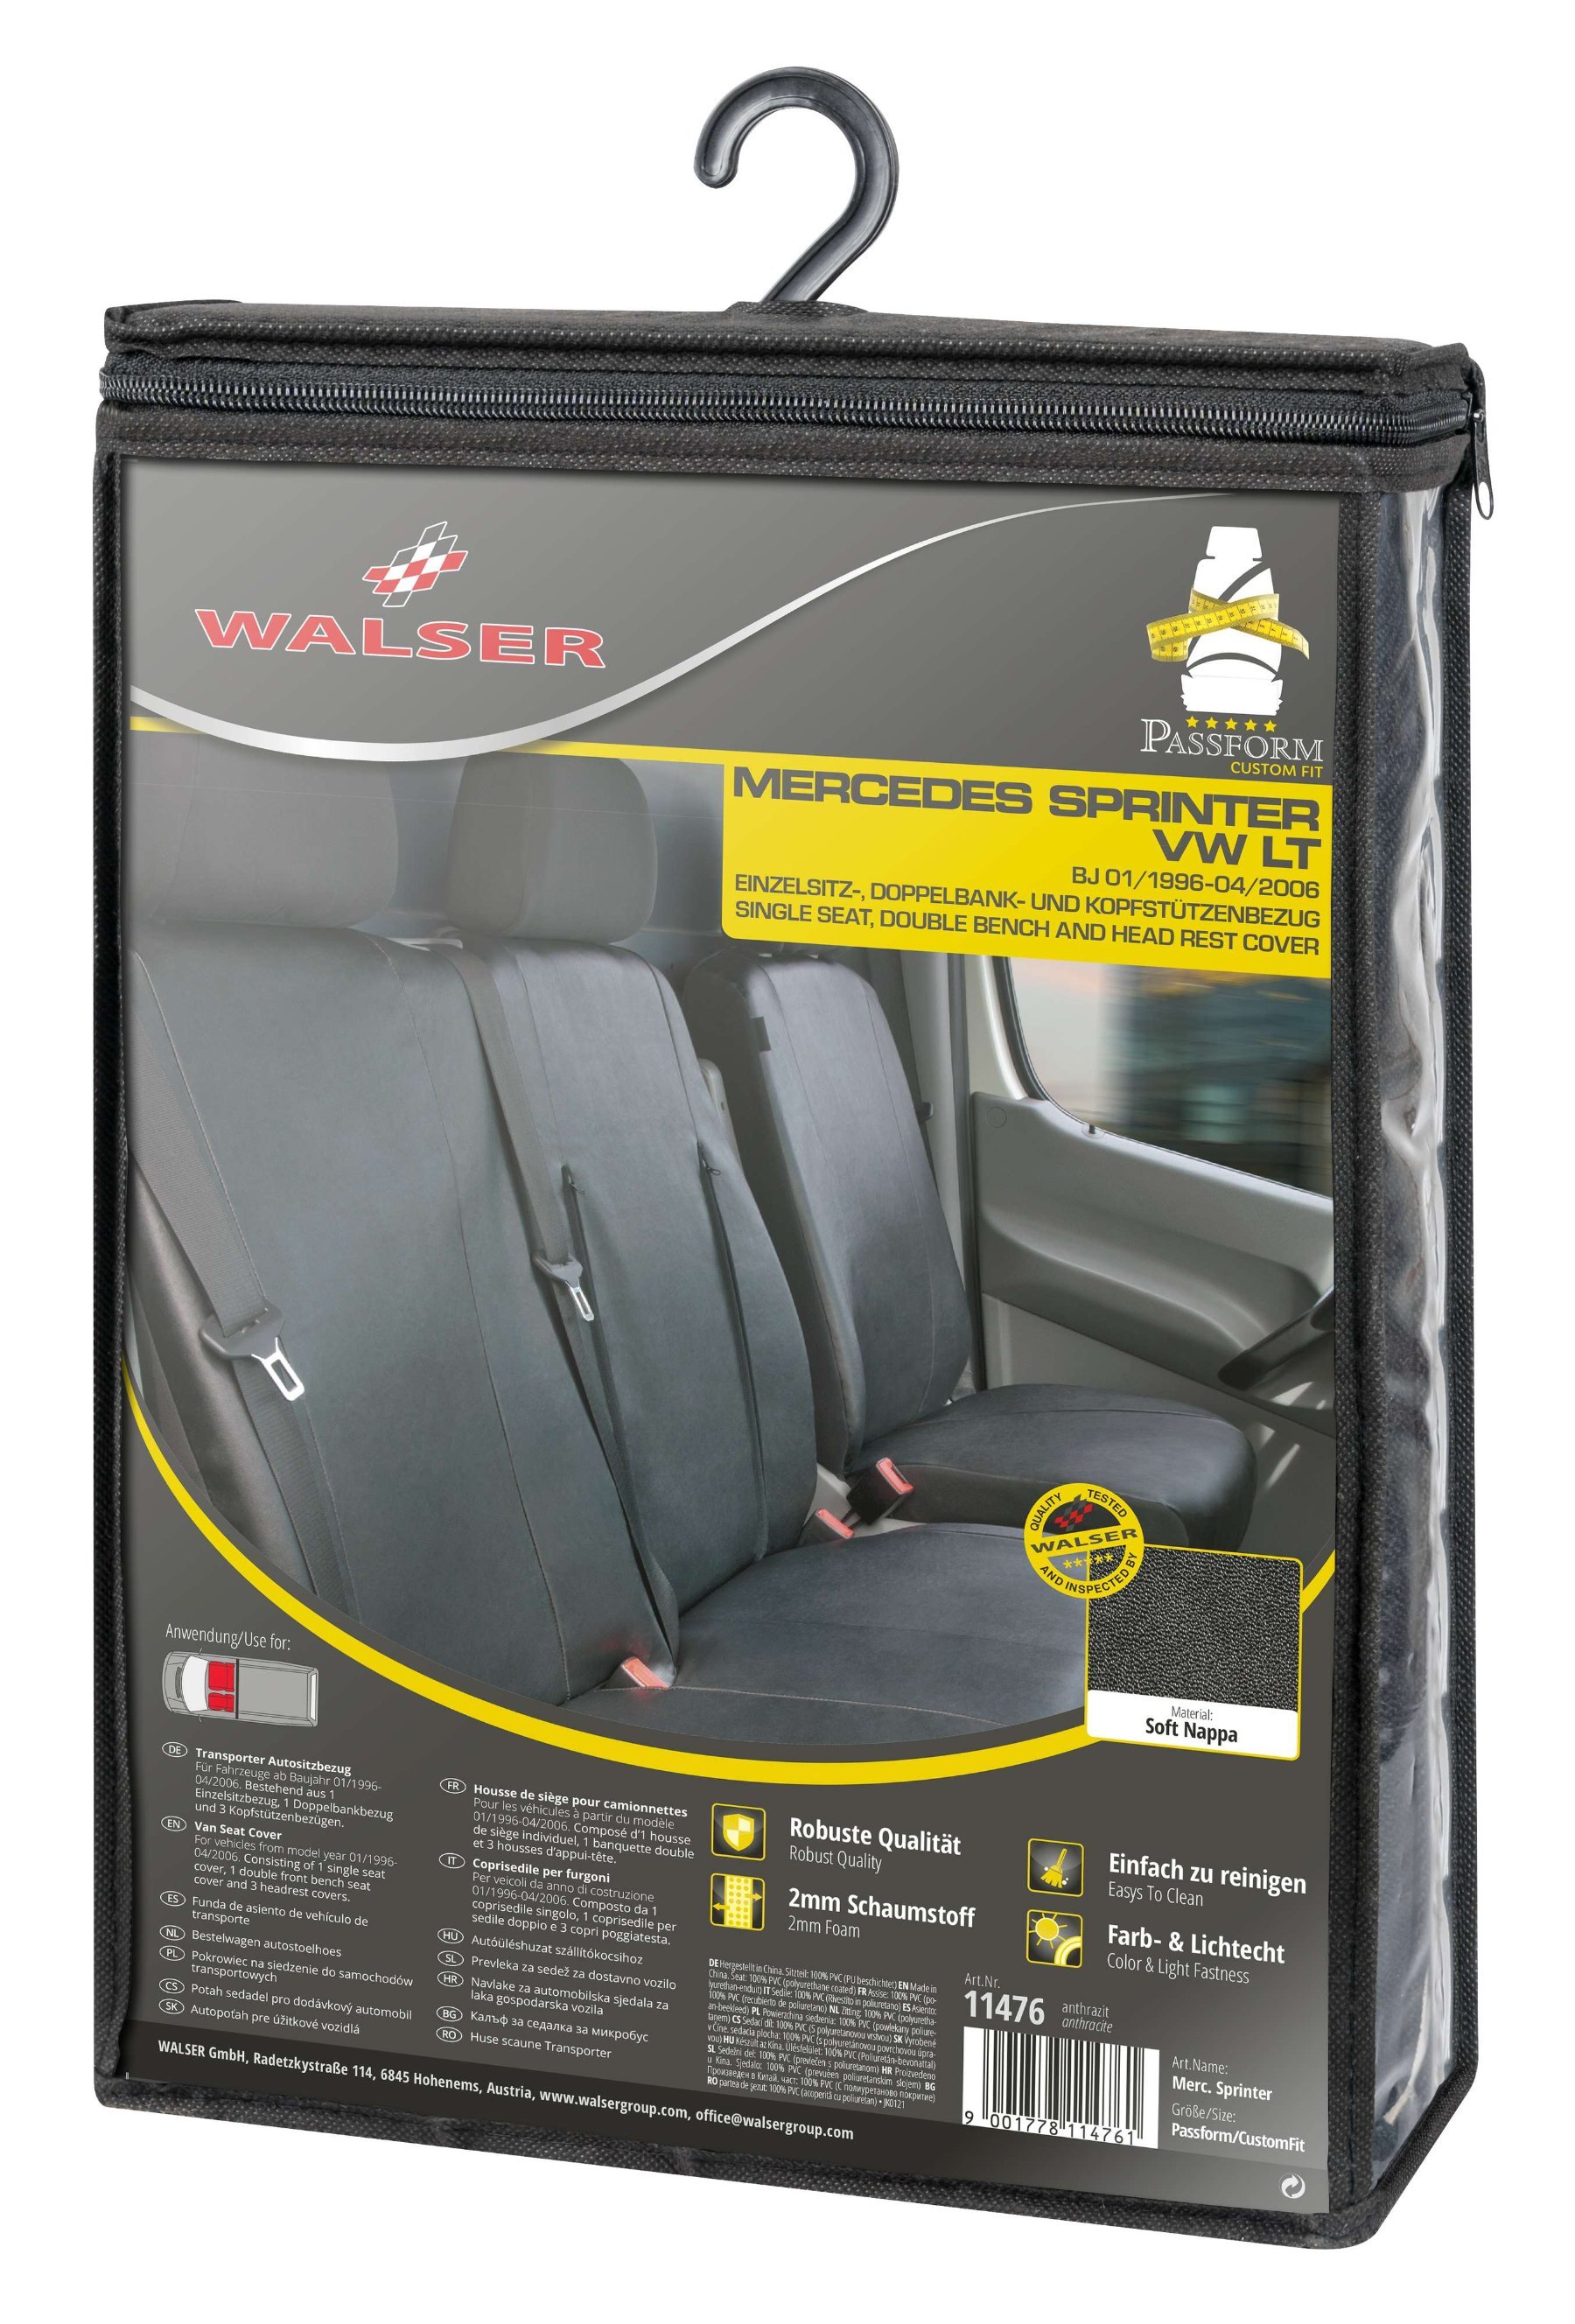 Car Seat cover Transporter made of imitation leather for Mercedes-Benz Sprinter, VW LT, single & double seat